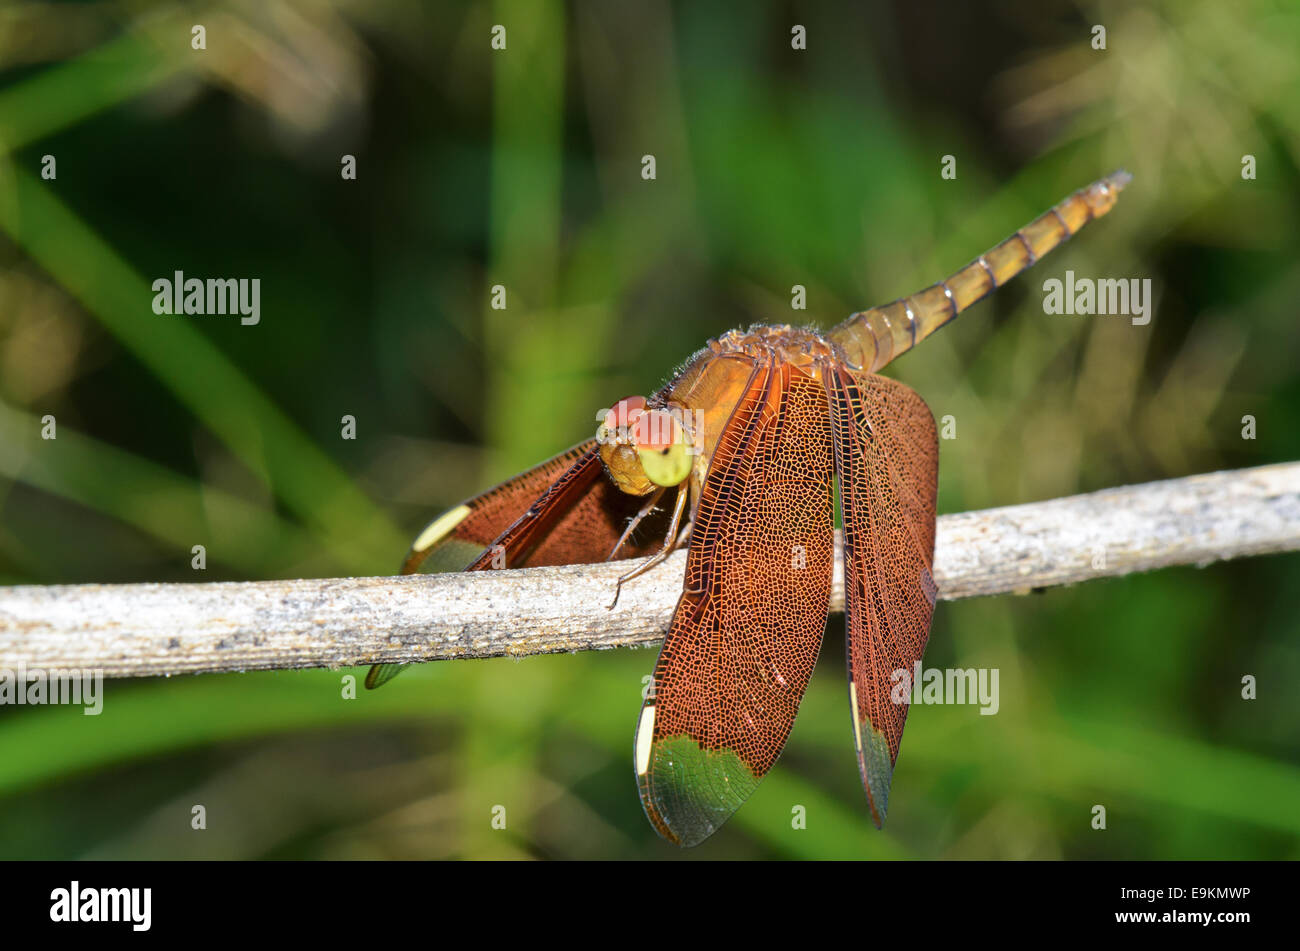 Russet Dragonfly or Neurothemis Fulvia female rest on a branch in the bush Stock Photo